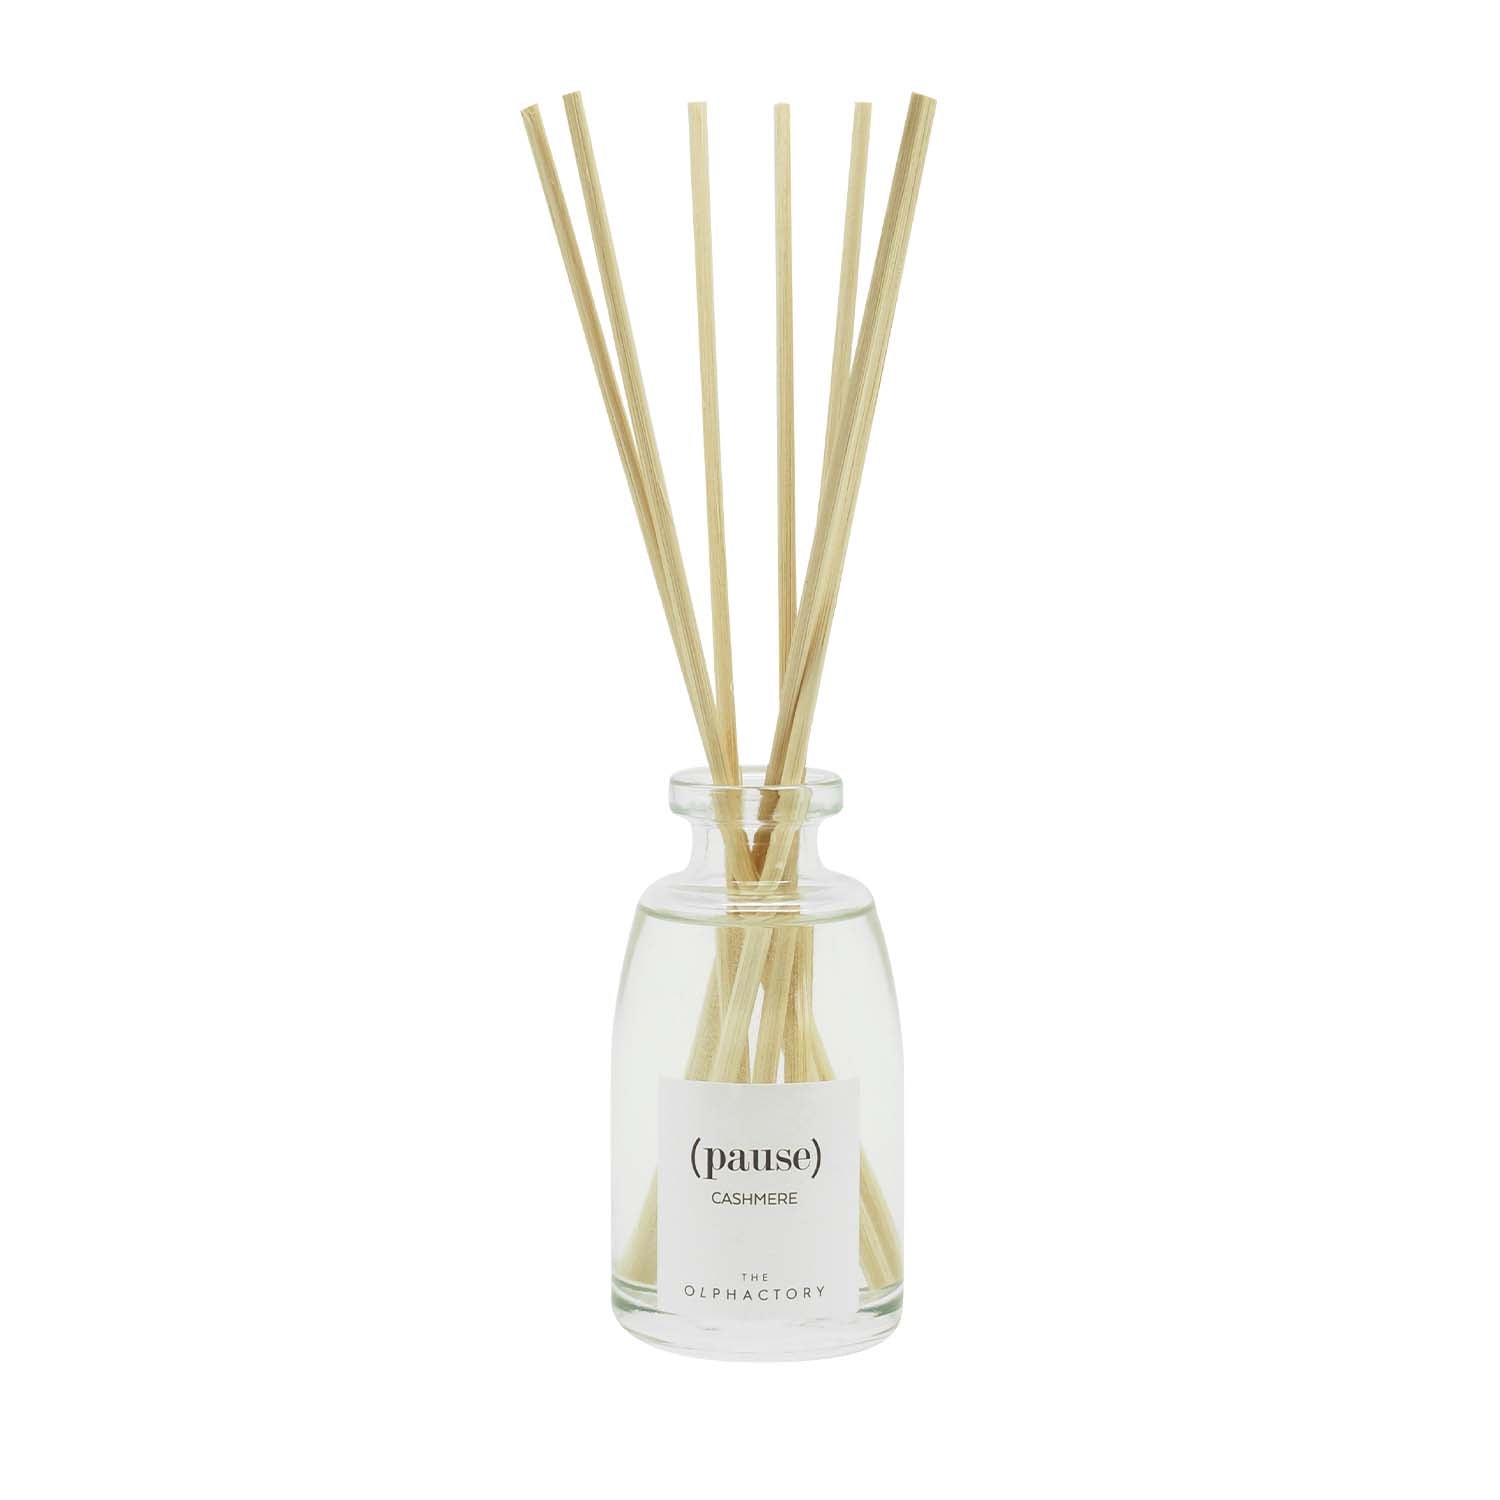 Fragrance Diffuser – Cashmere- The Olphactory